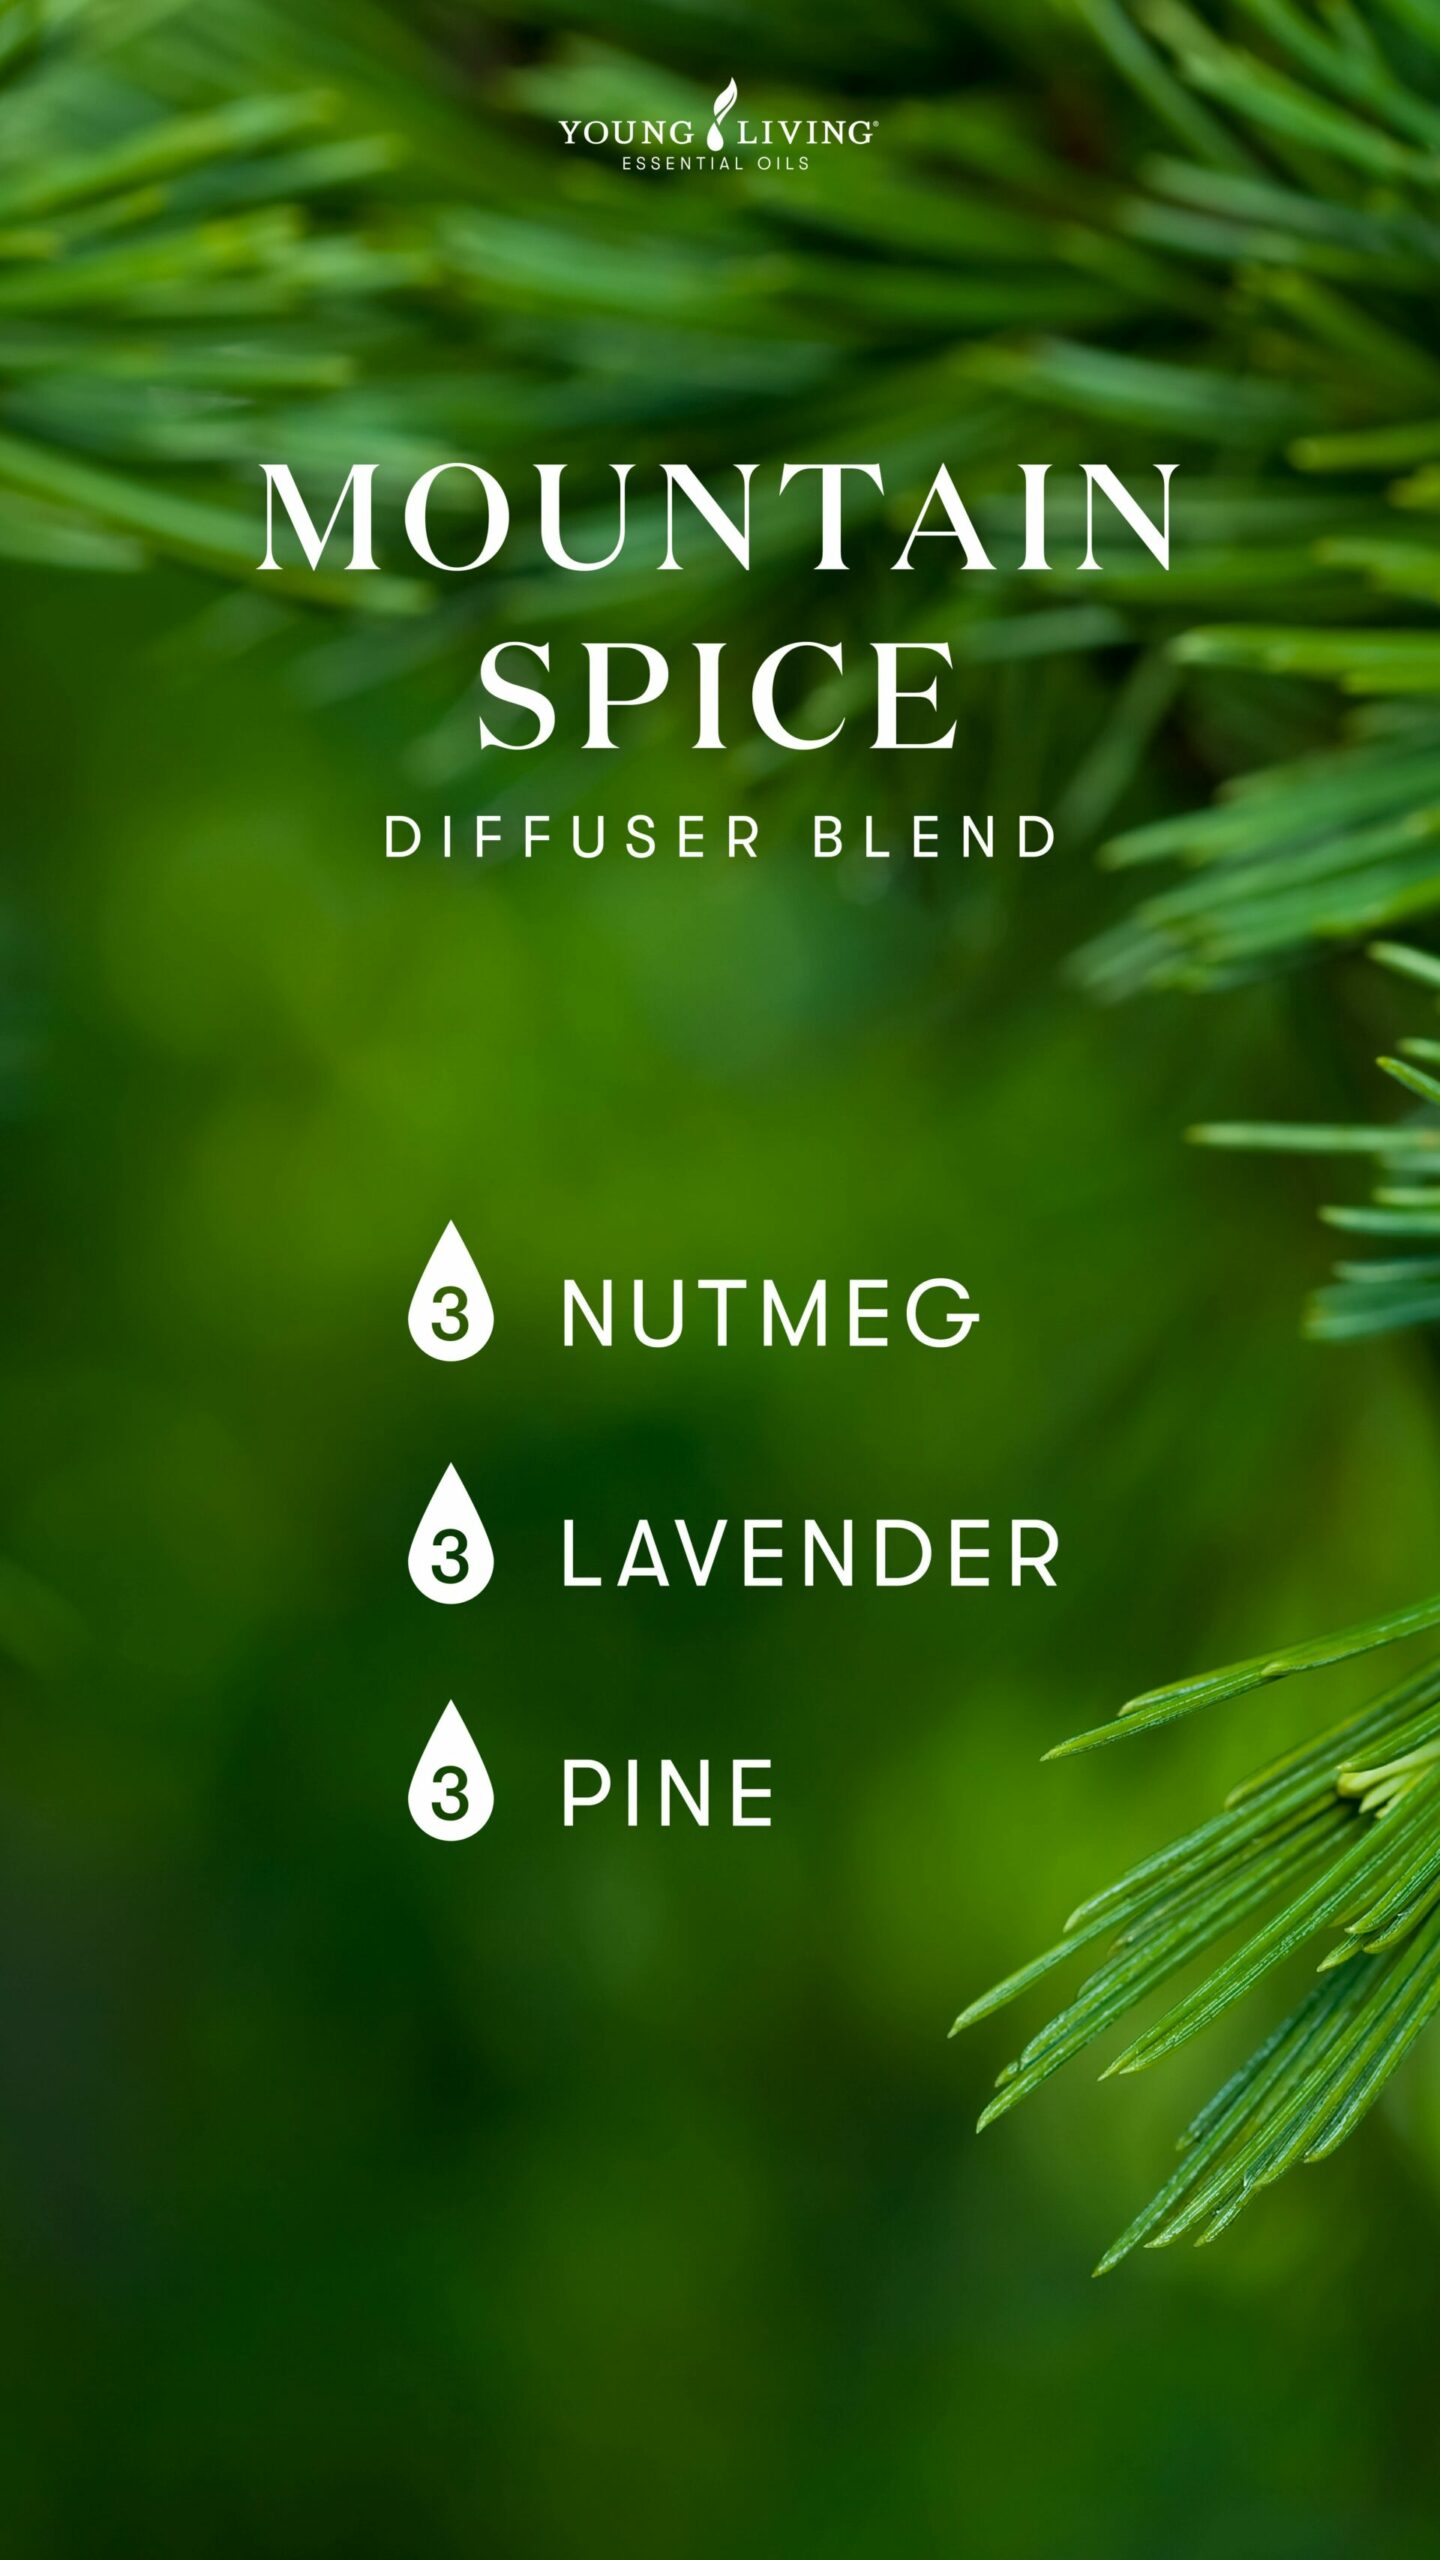 Mountain Spice Diffuser Blend - Young Living Lavender Life Blog 